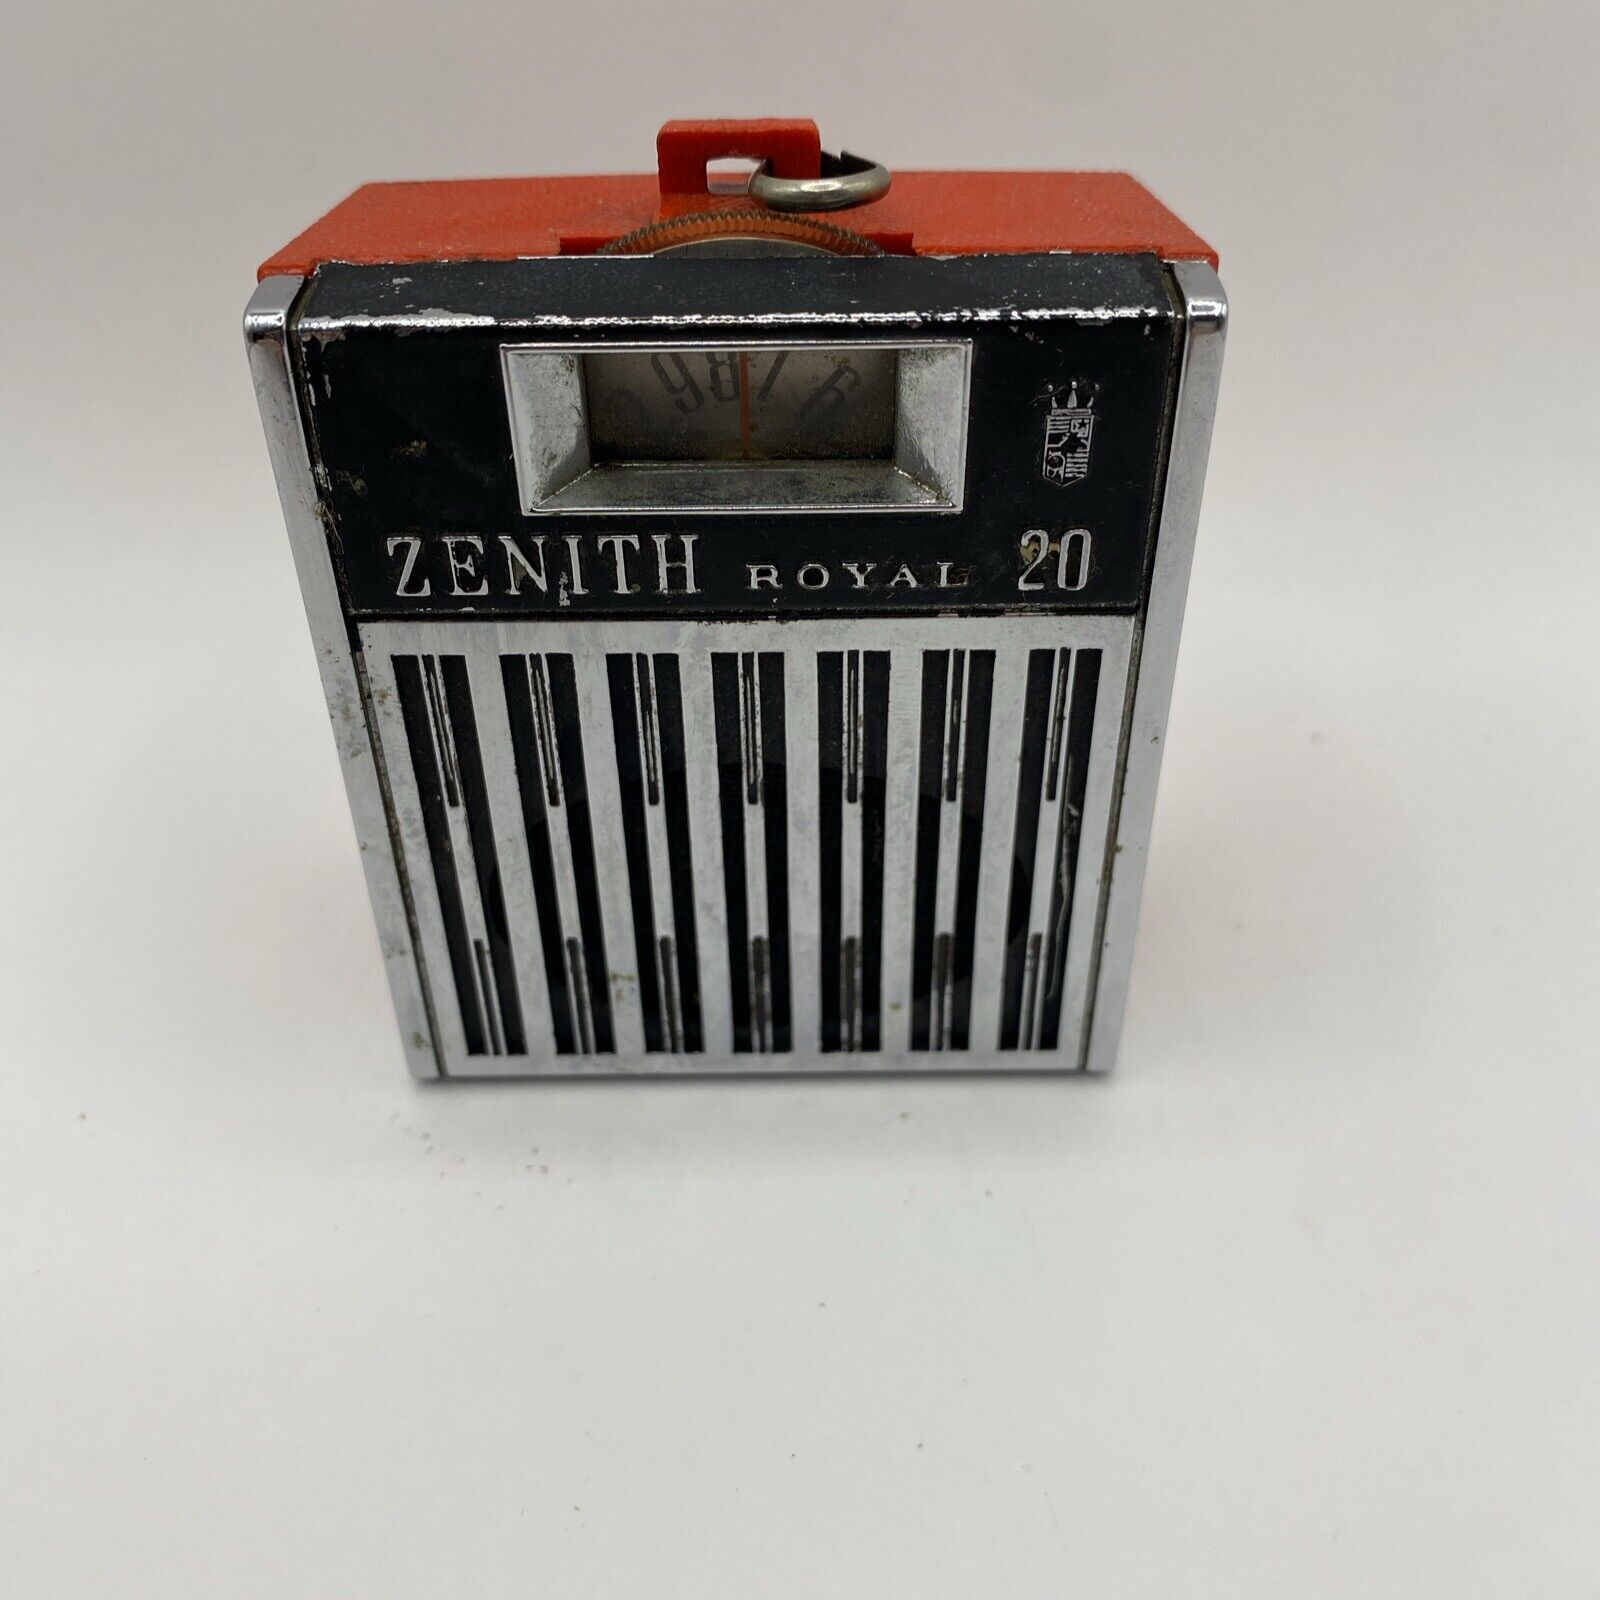 Vintage Zenith Royal 20 Transistor Radio Untested Red FAST SHIPPING